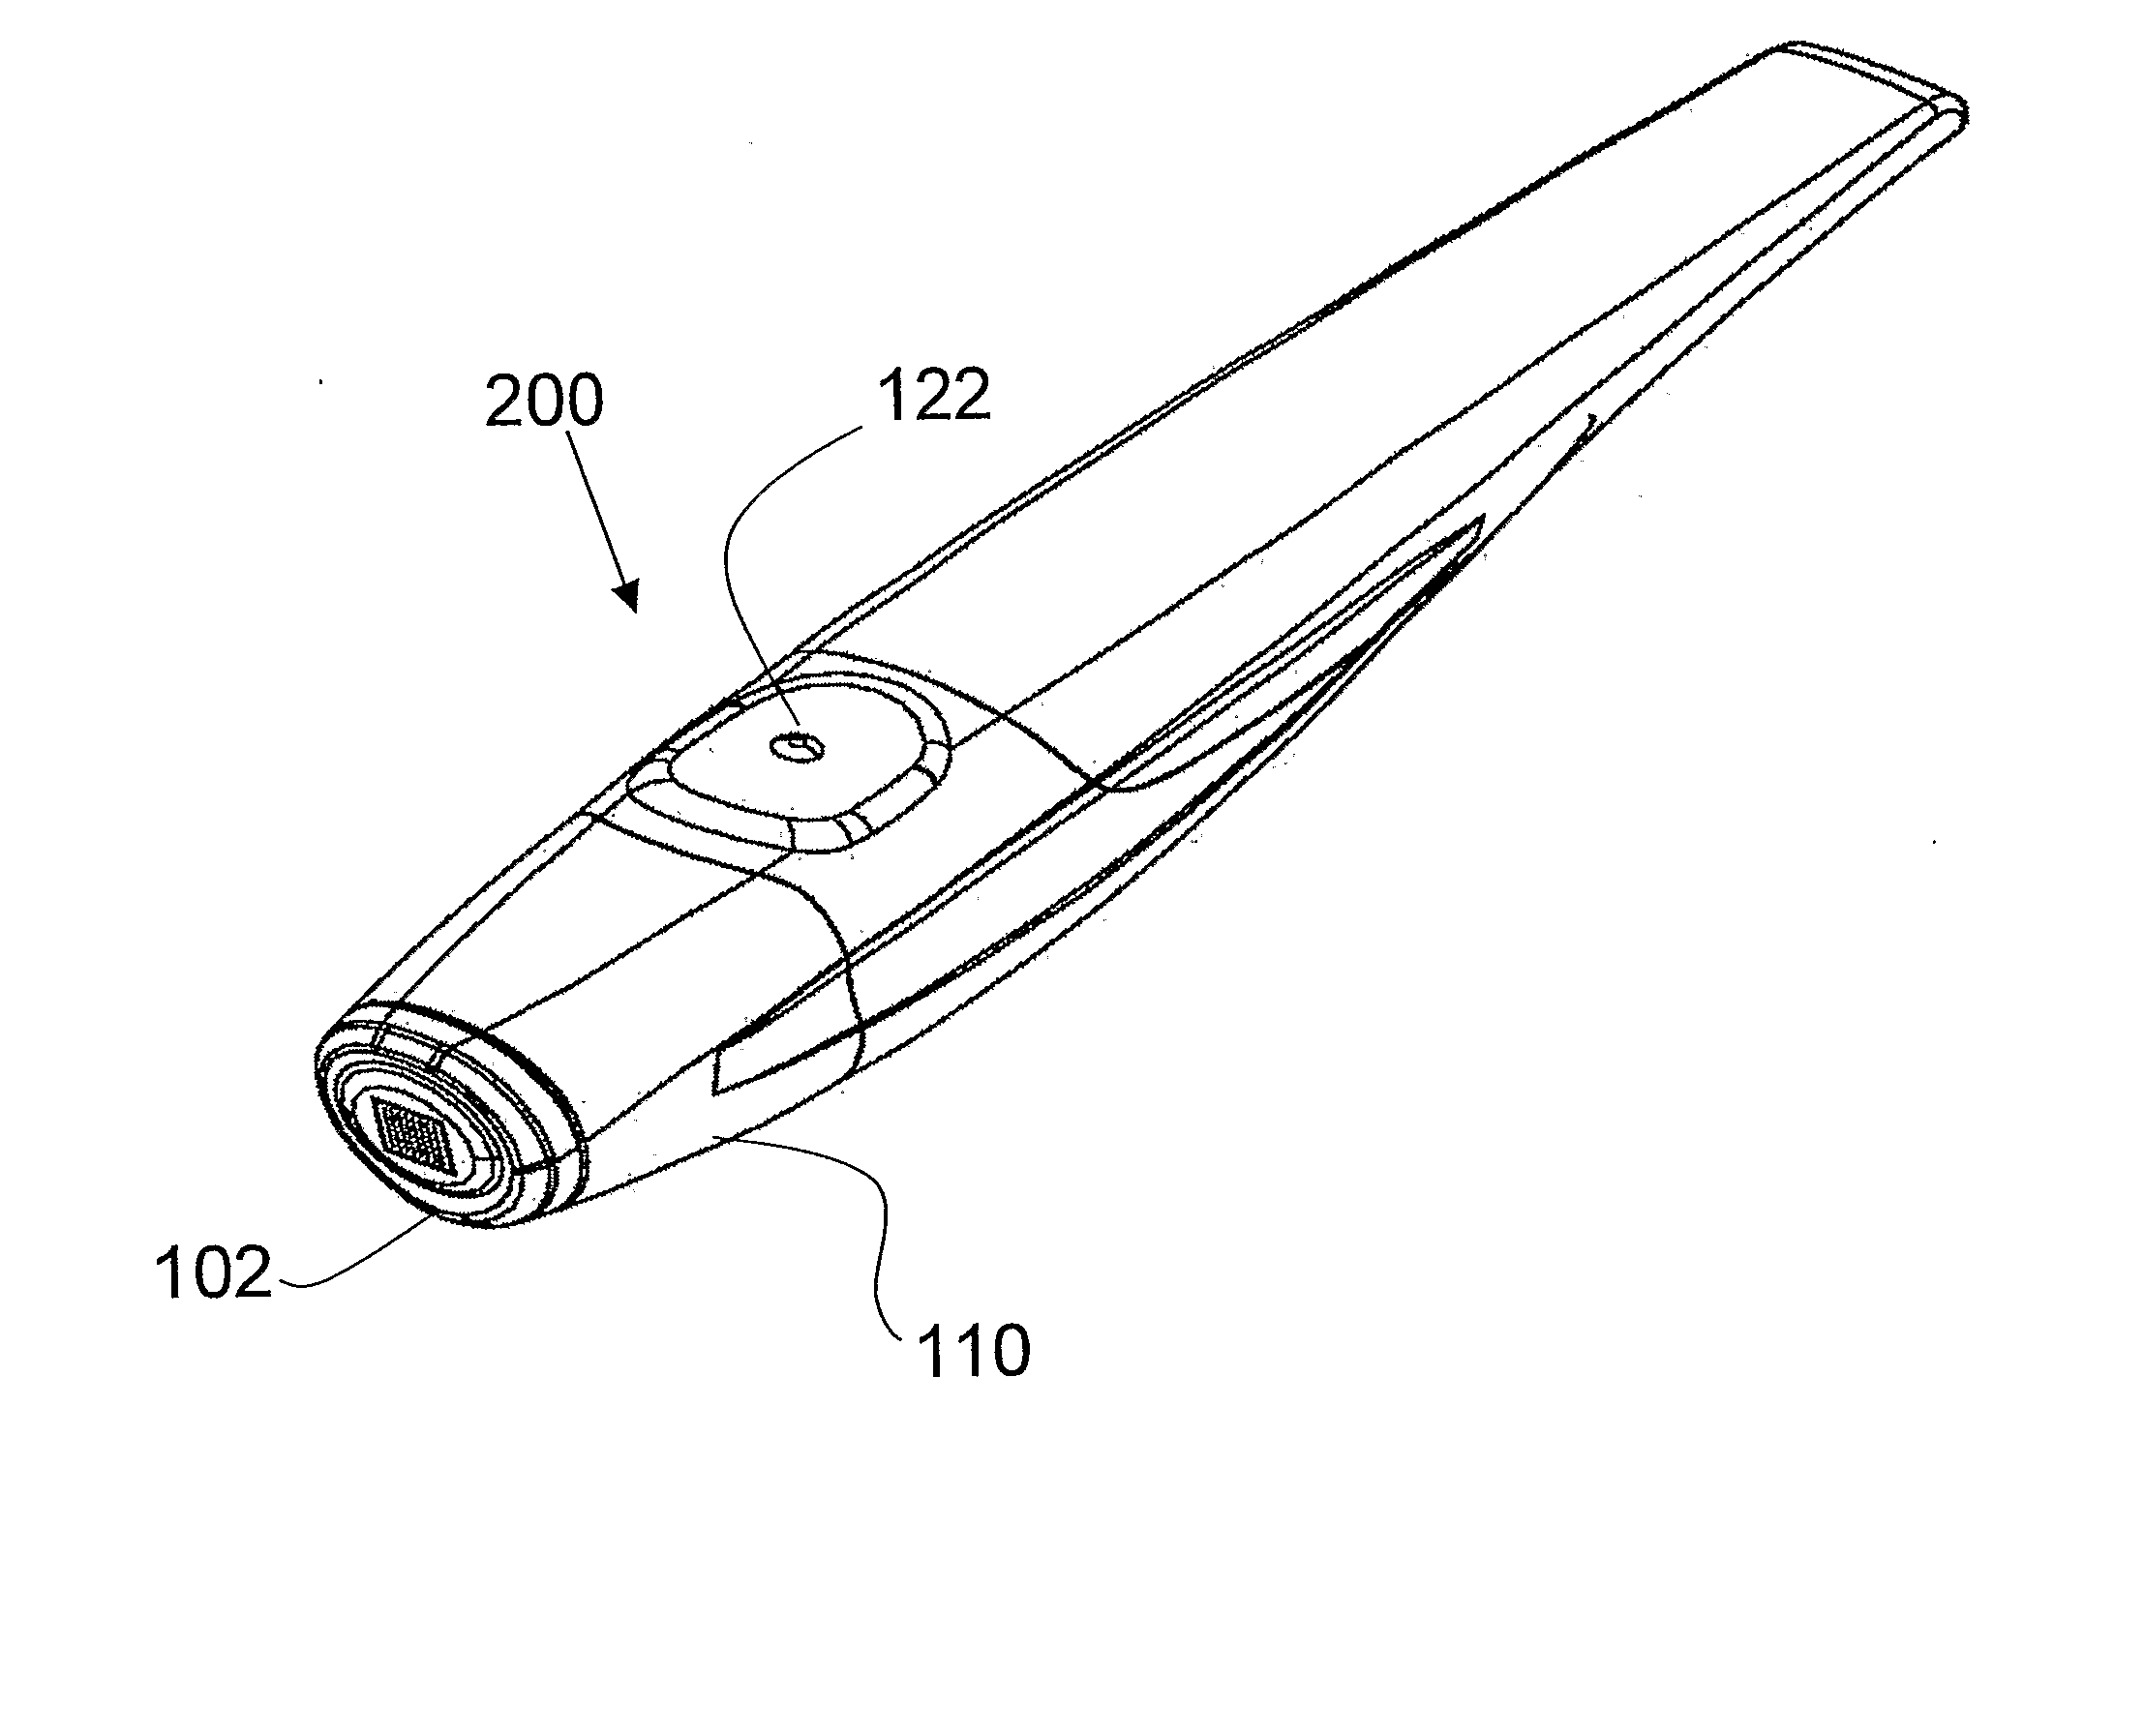 Device and methods combining vibrating micro-protrusions with phototherapy